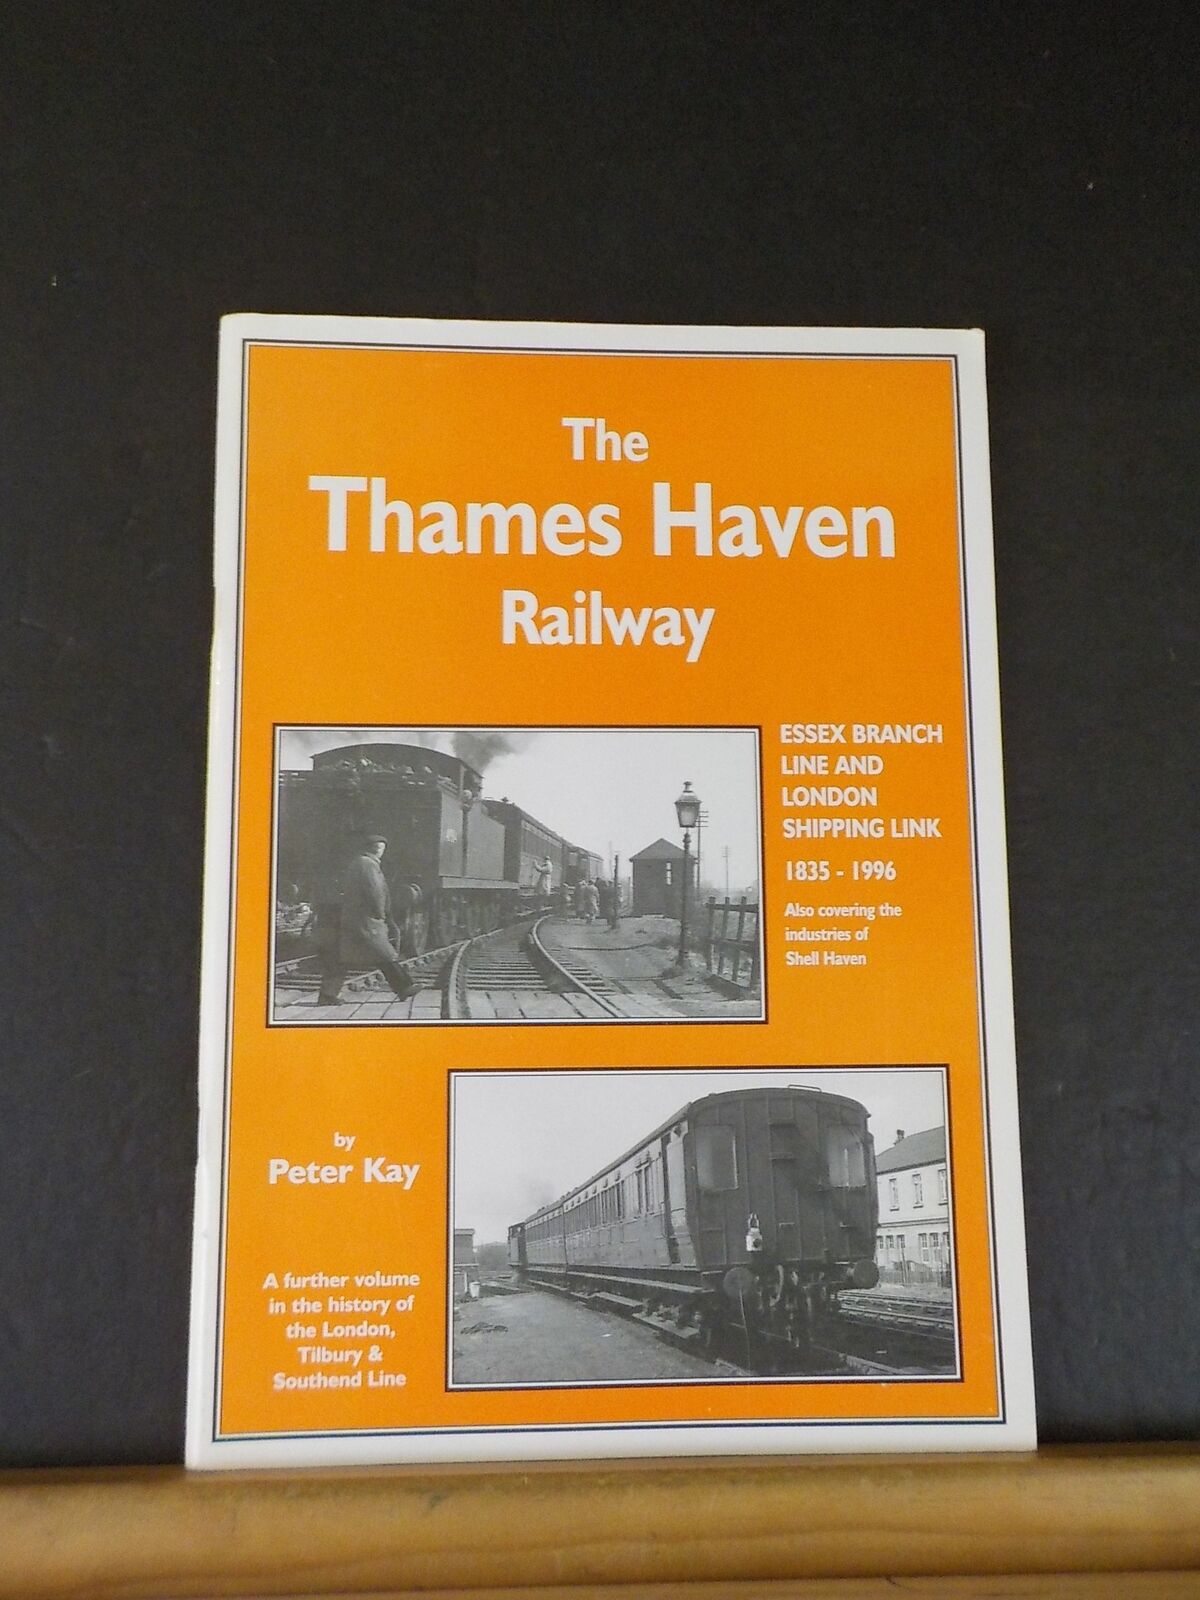 Thames Haven Railway The by Peter Kay 1999 soft cover stapled